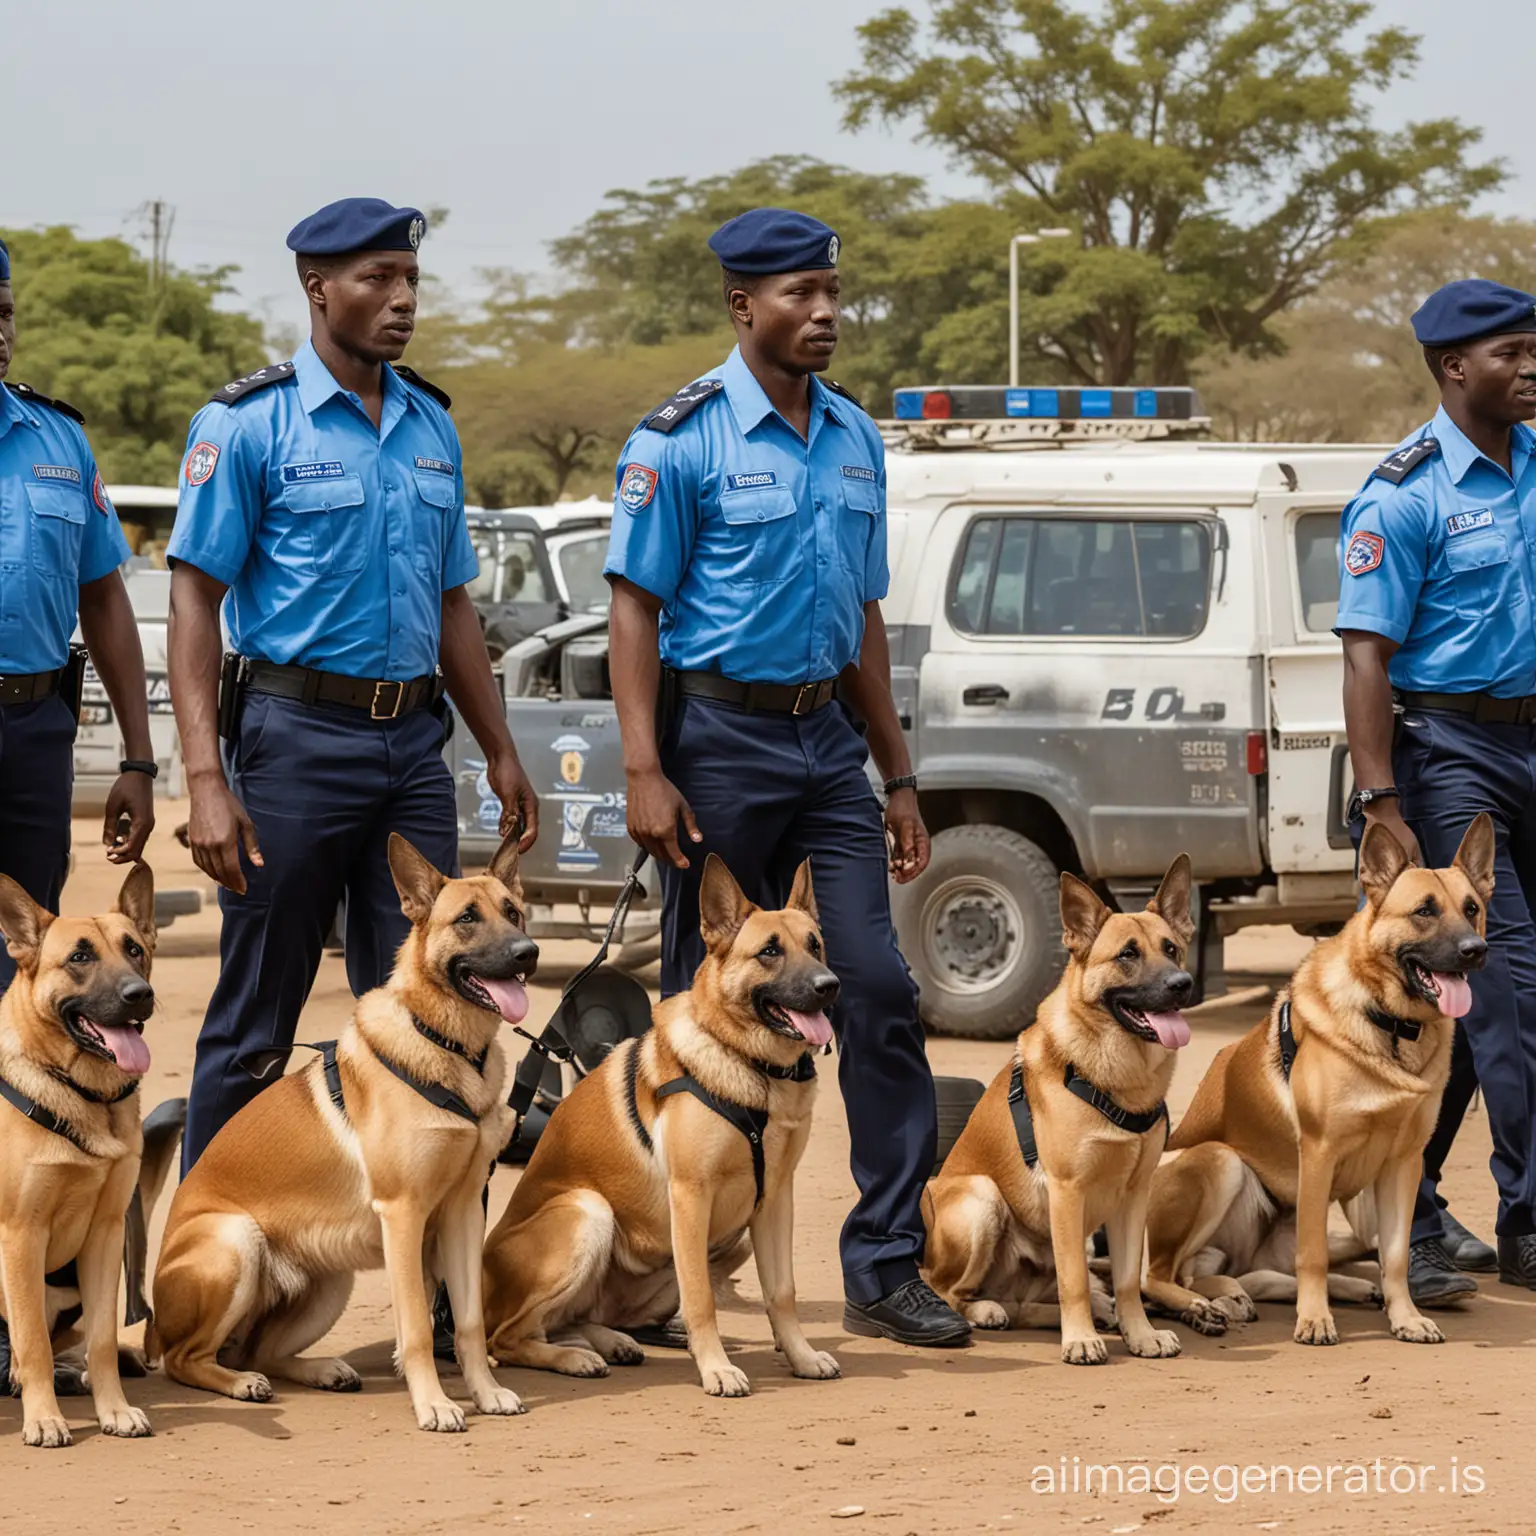 Twenty African security staff are well-equipped, dressed in a uniform color: #6495ED 'blue' shirts and black pants, with security dogs appearing alongside them as well-trained security guards. In the background, there is a security vehicle.